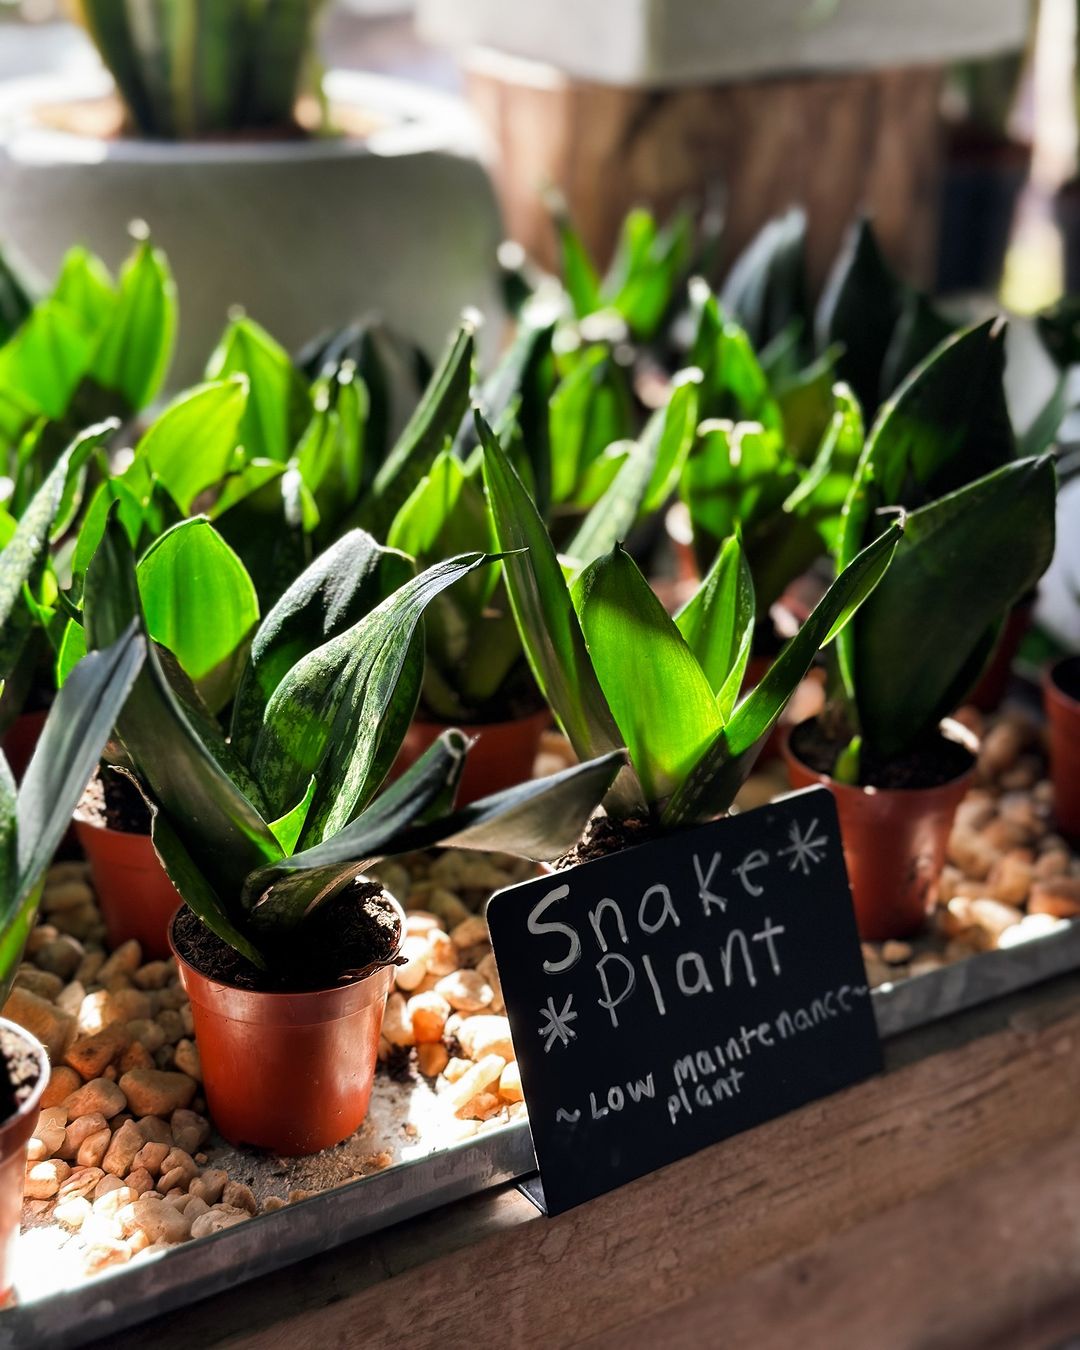 A variety of snake plant plants on display at a flower shop.